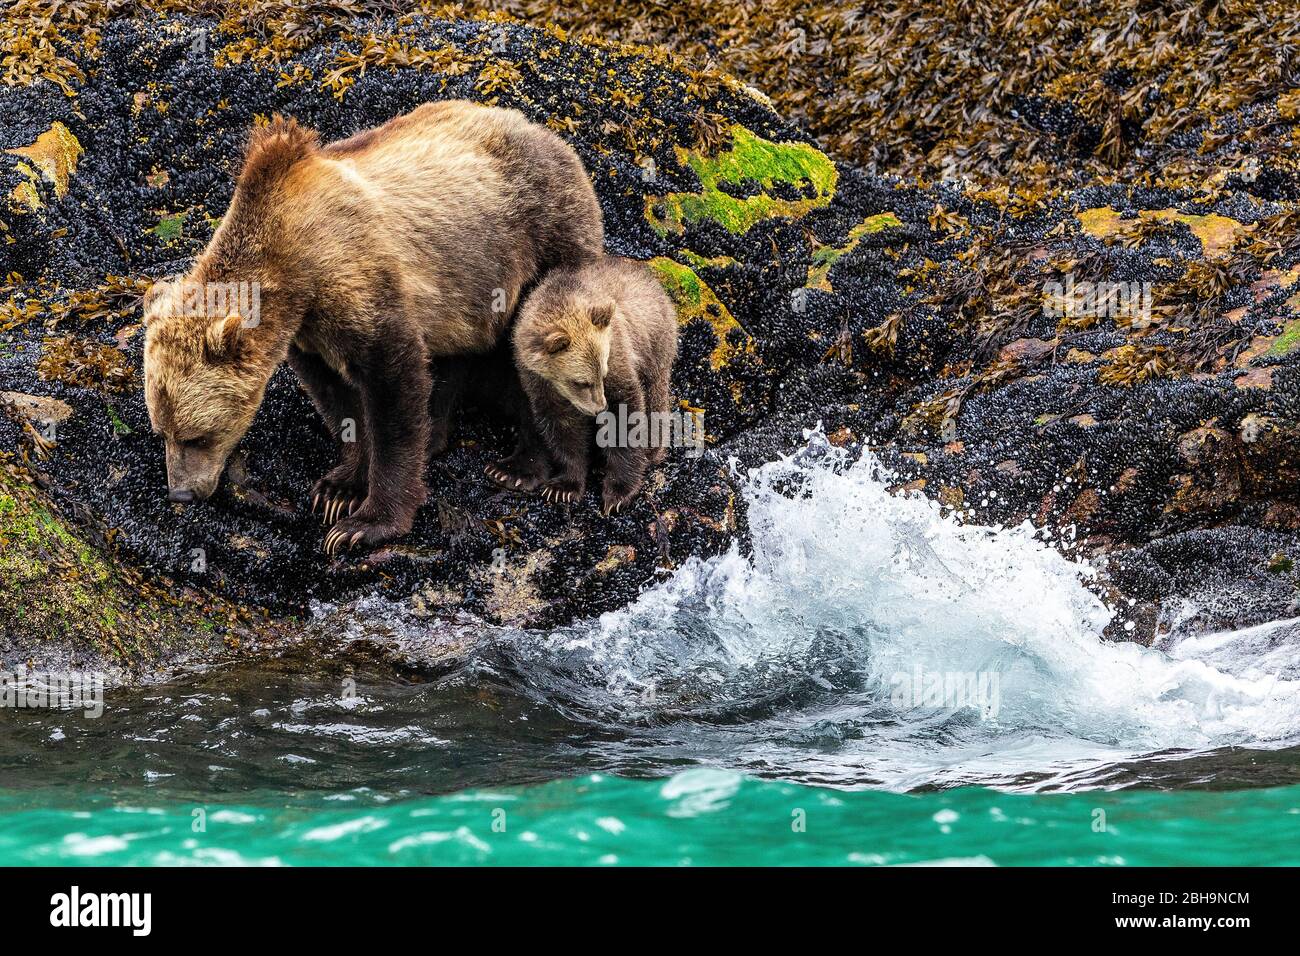 Bear cub with mother at the shoreline of the Great Bear Rainforest, First Nations area, British Columbia, Canada Stock Photo